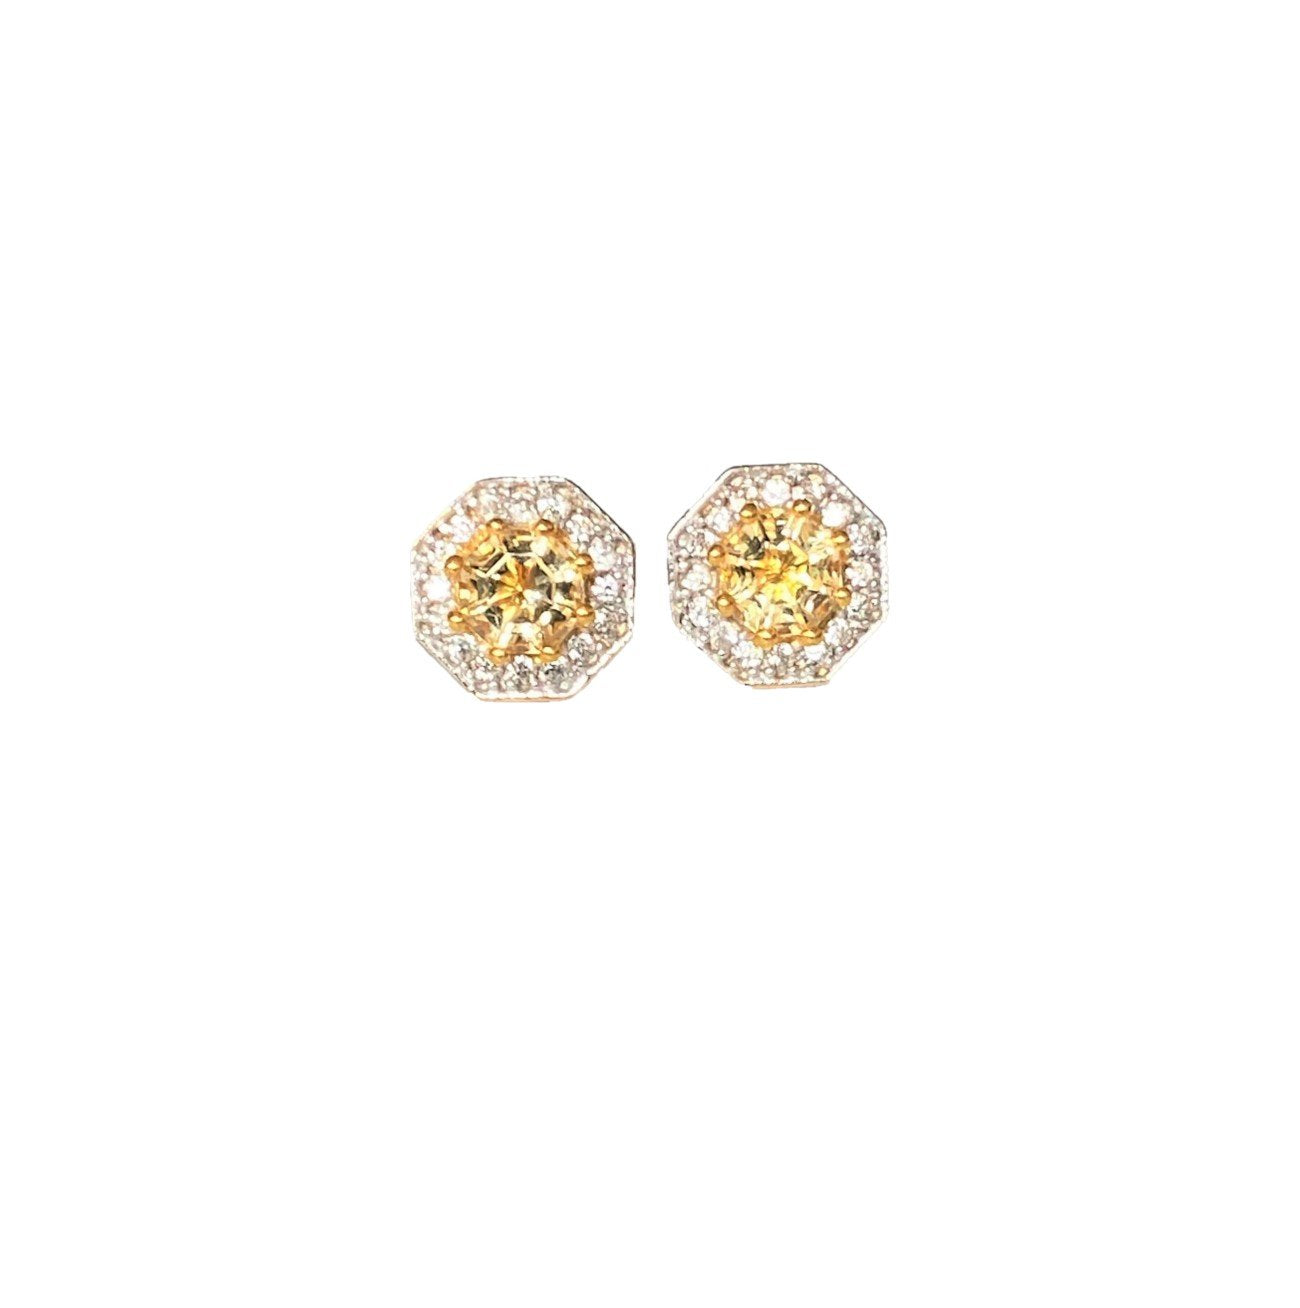 2.5ct. Citrine & Natural White Zircon Halo Stud Earrings,18K Gold Plated Silver November birthstone fine jewelry gift for women